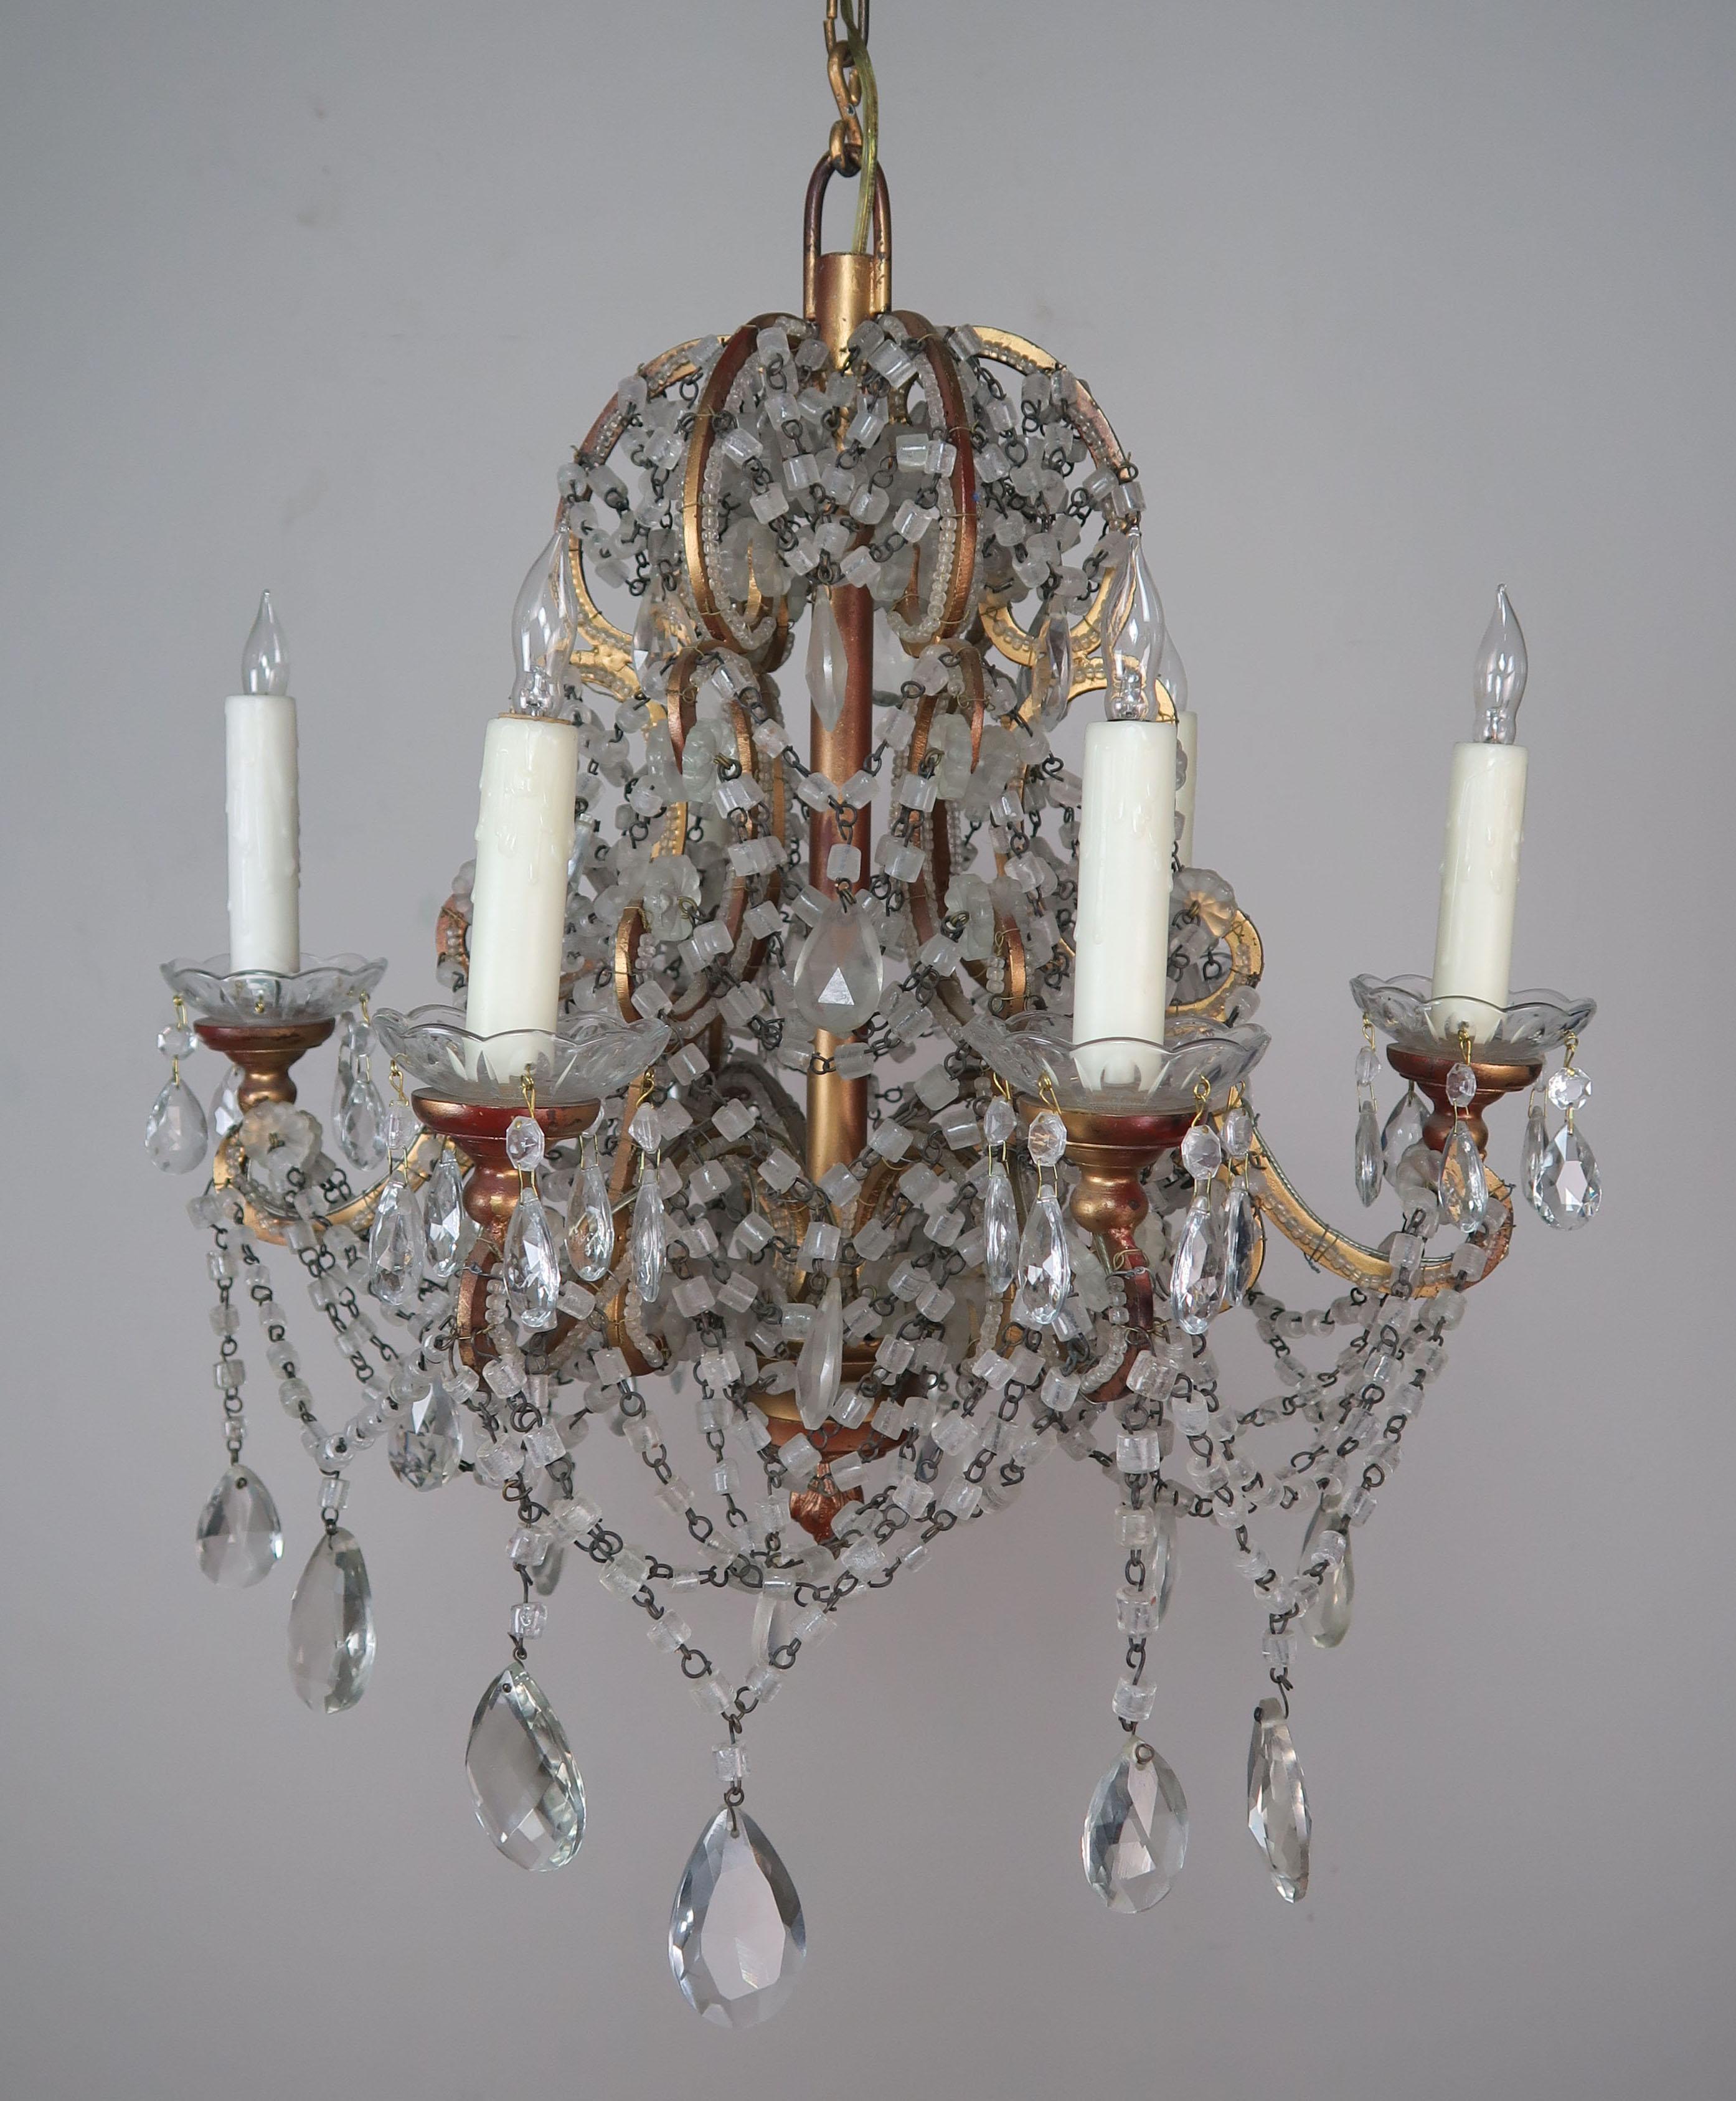 Italian six-light macaroni beaded crystal chandelier with gilt metal frame. The fixture has been newly rewired with drip wax candle covers and includes chain and canopy.